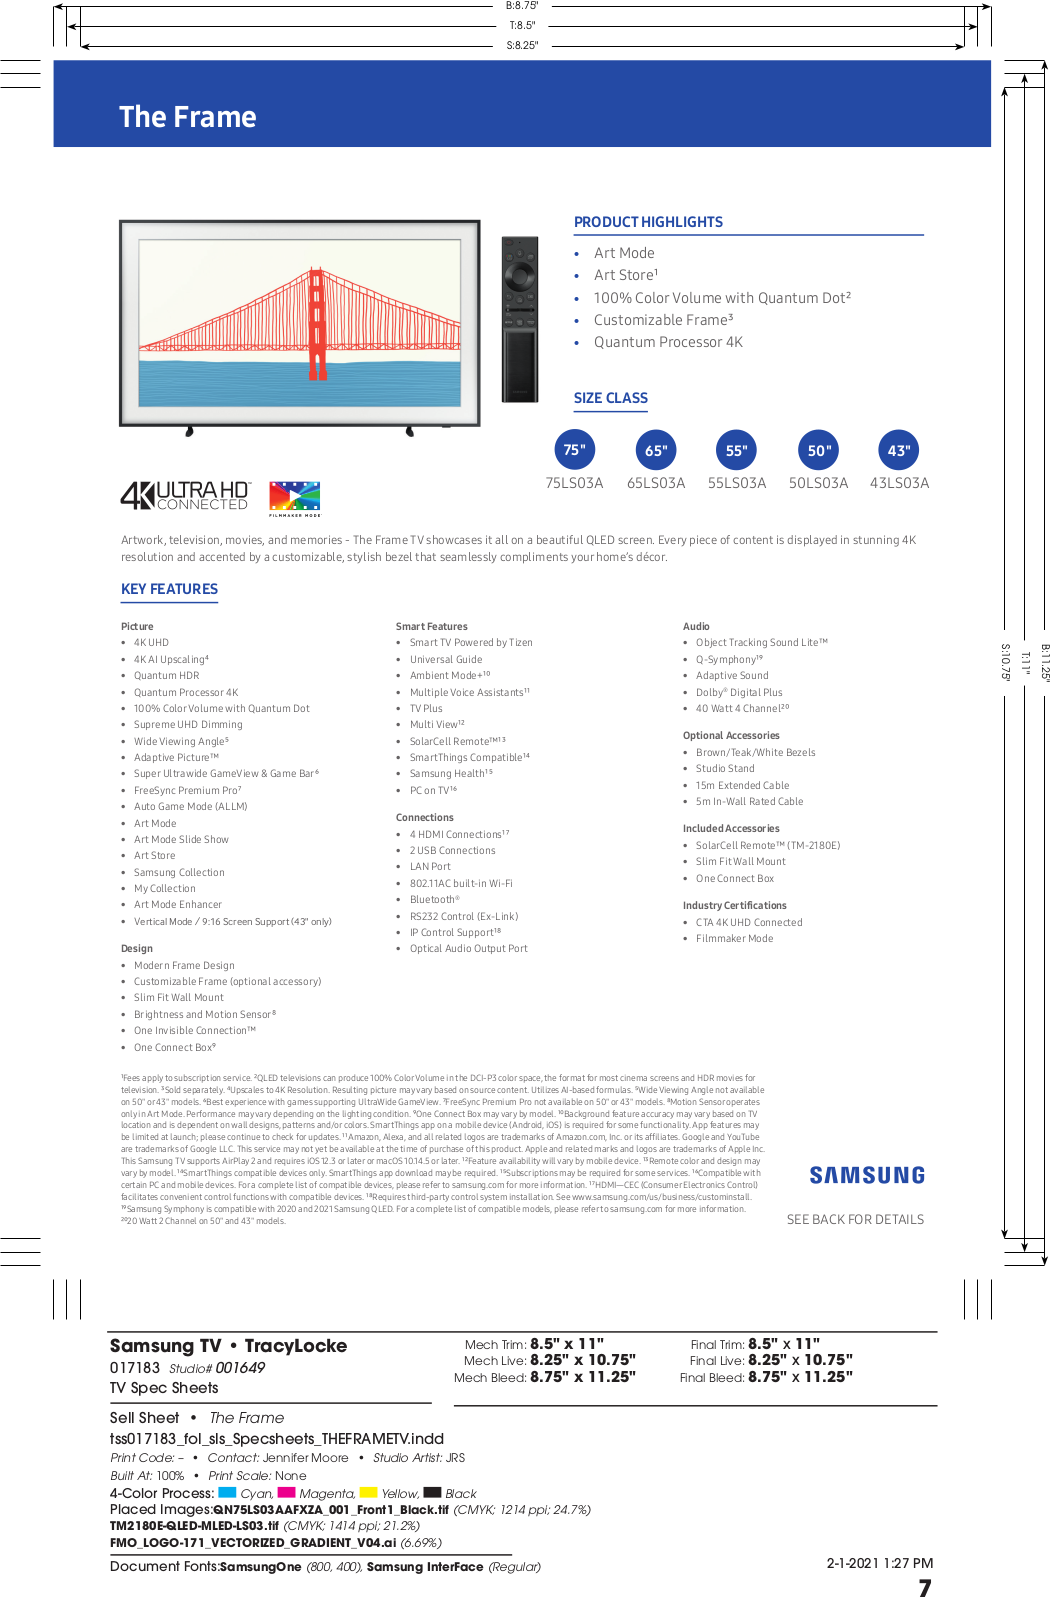 Samsung QN75LS03A, QN65LS03A, QN55LS03A, QN50LS03A, QN43LS03A Specification Sheet